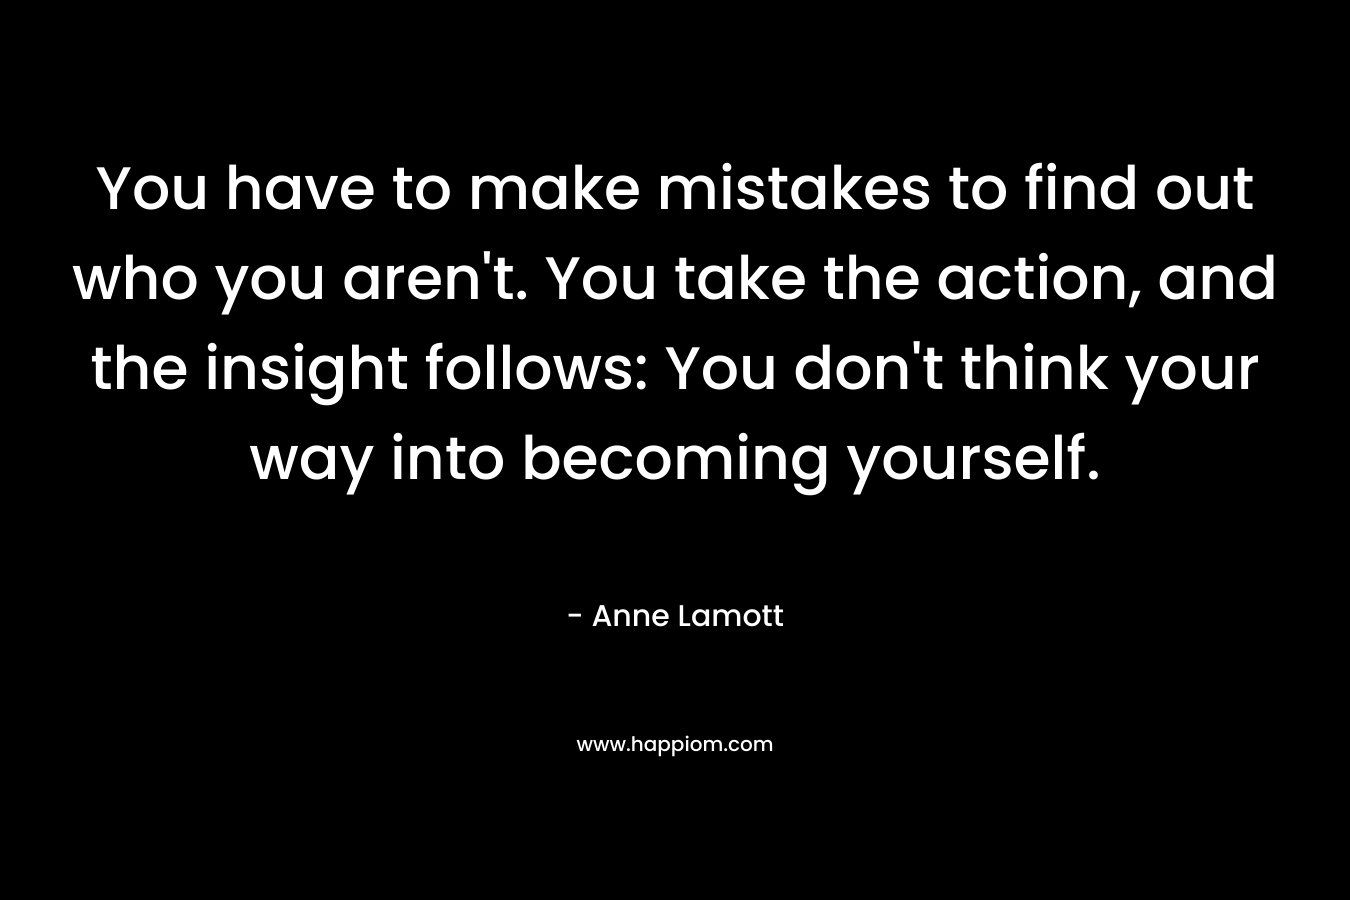 You have to make mistakes to find out who you aren't. You take the action, and the insight follows: You don't think your way into becoming yourself.